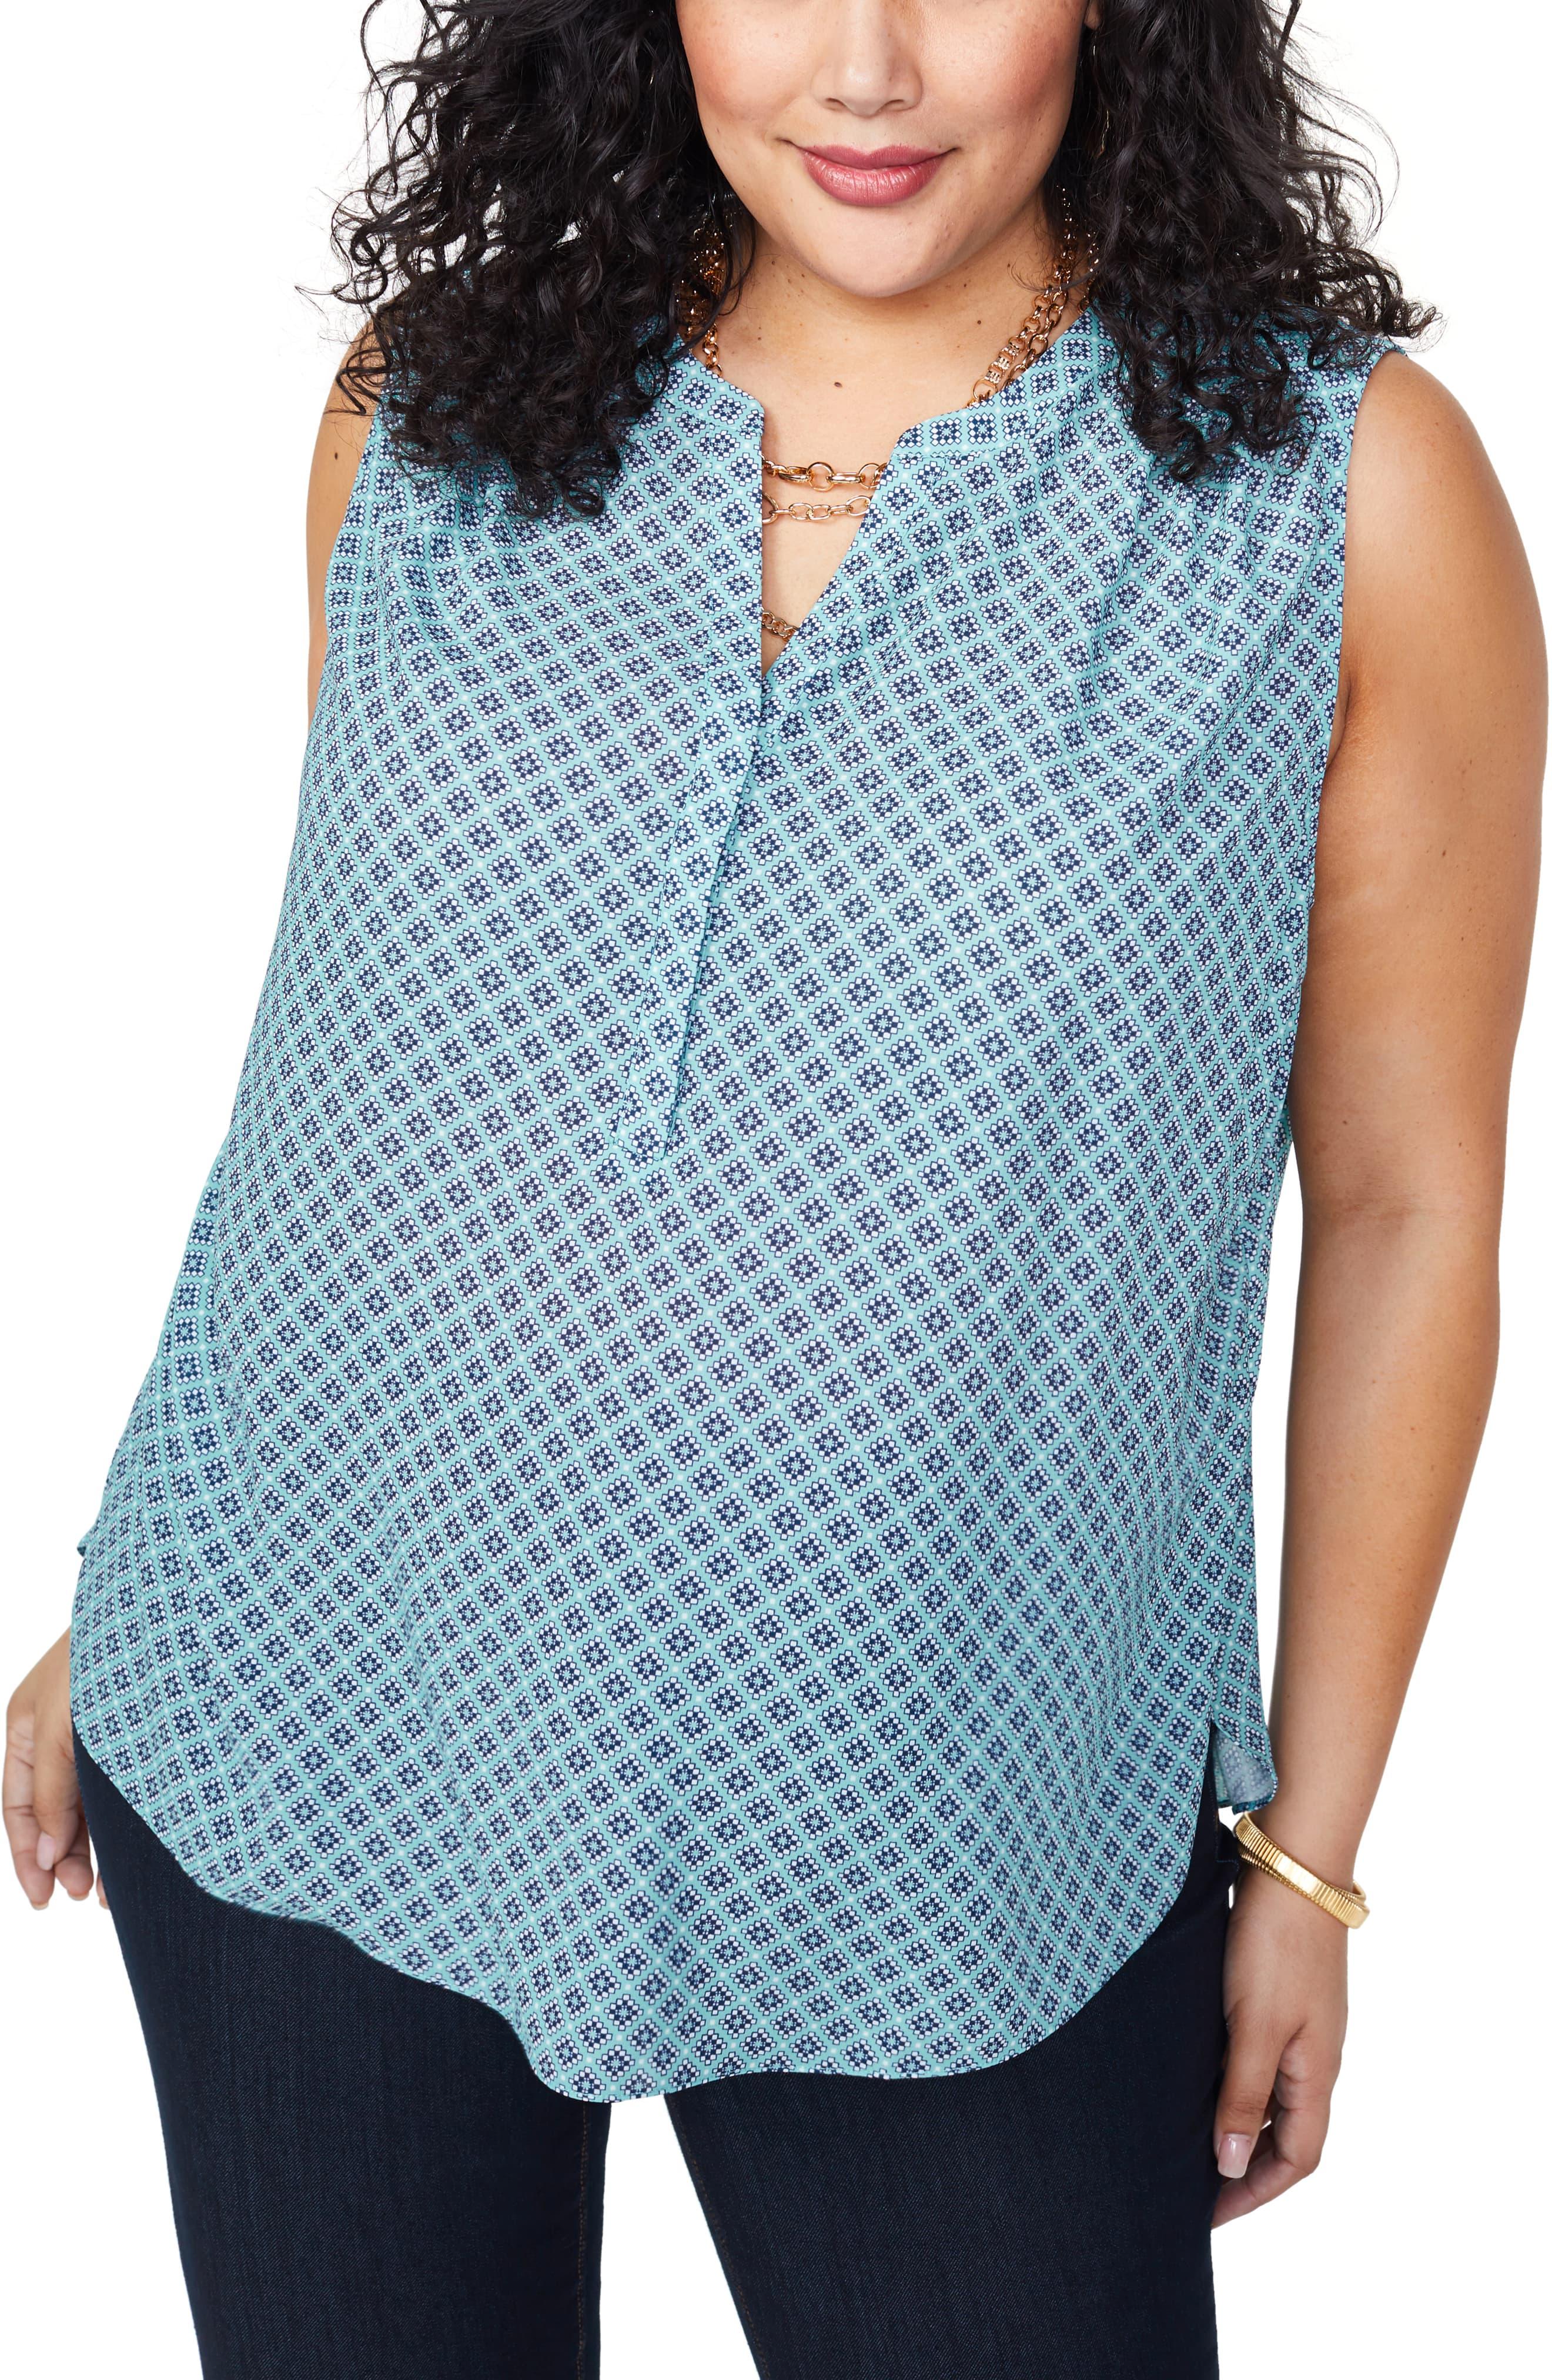 NYDJ Curves 360 By Perfect Sleeveless Top in Blue - Lyst